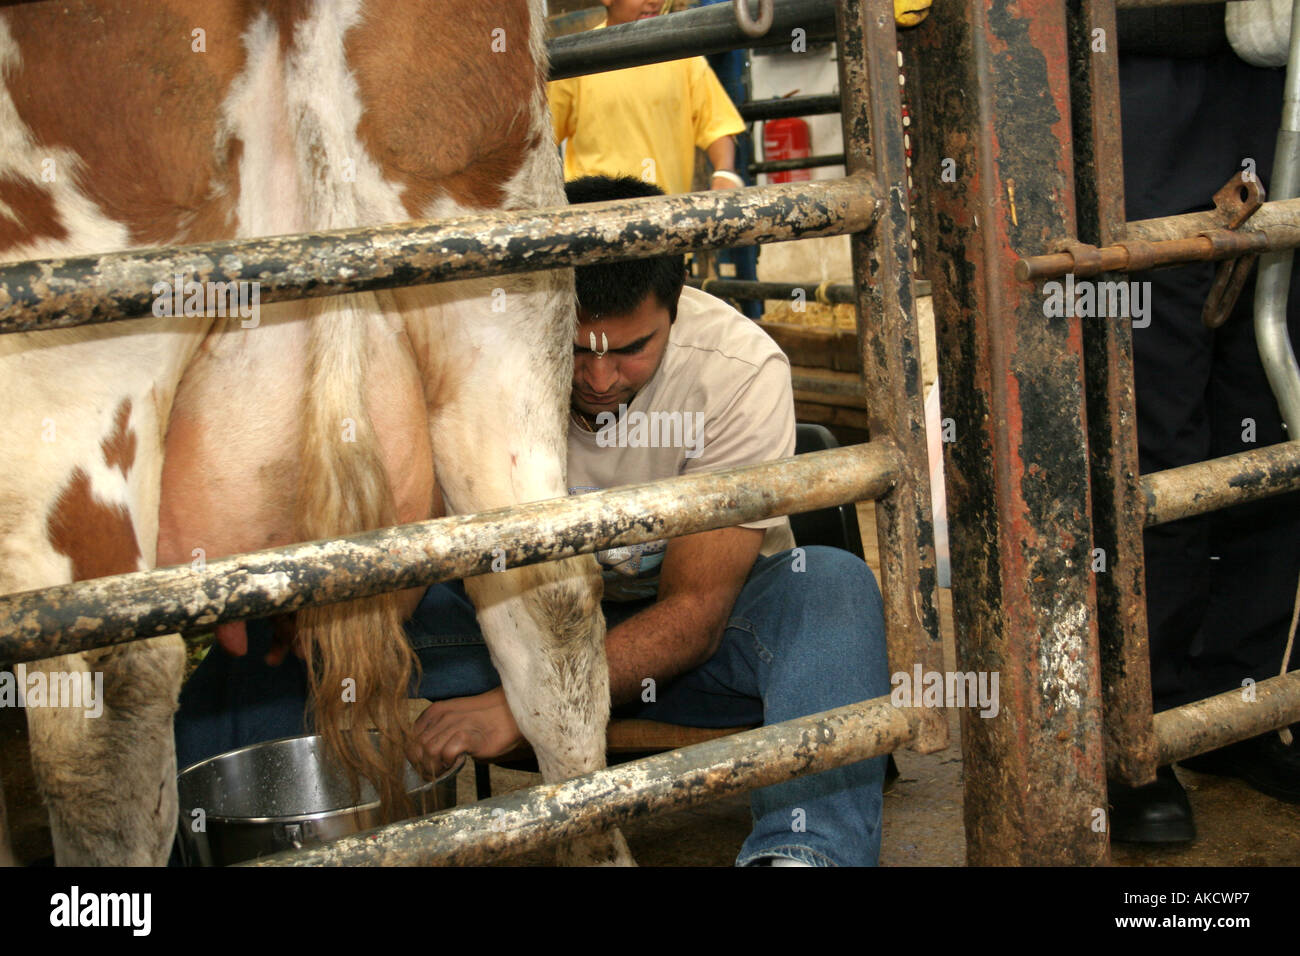 Man milking a cow at a temple in North London Stock Photo